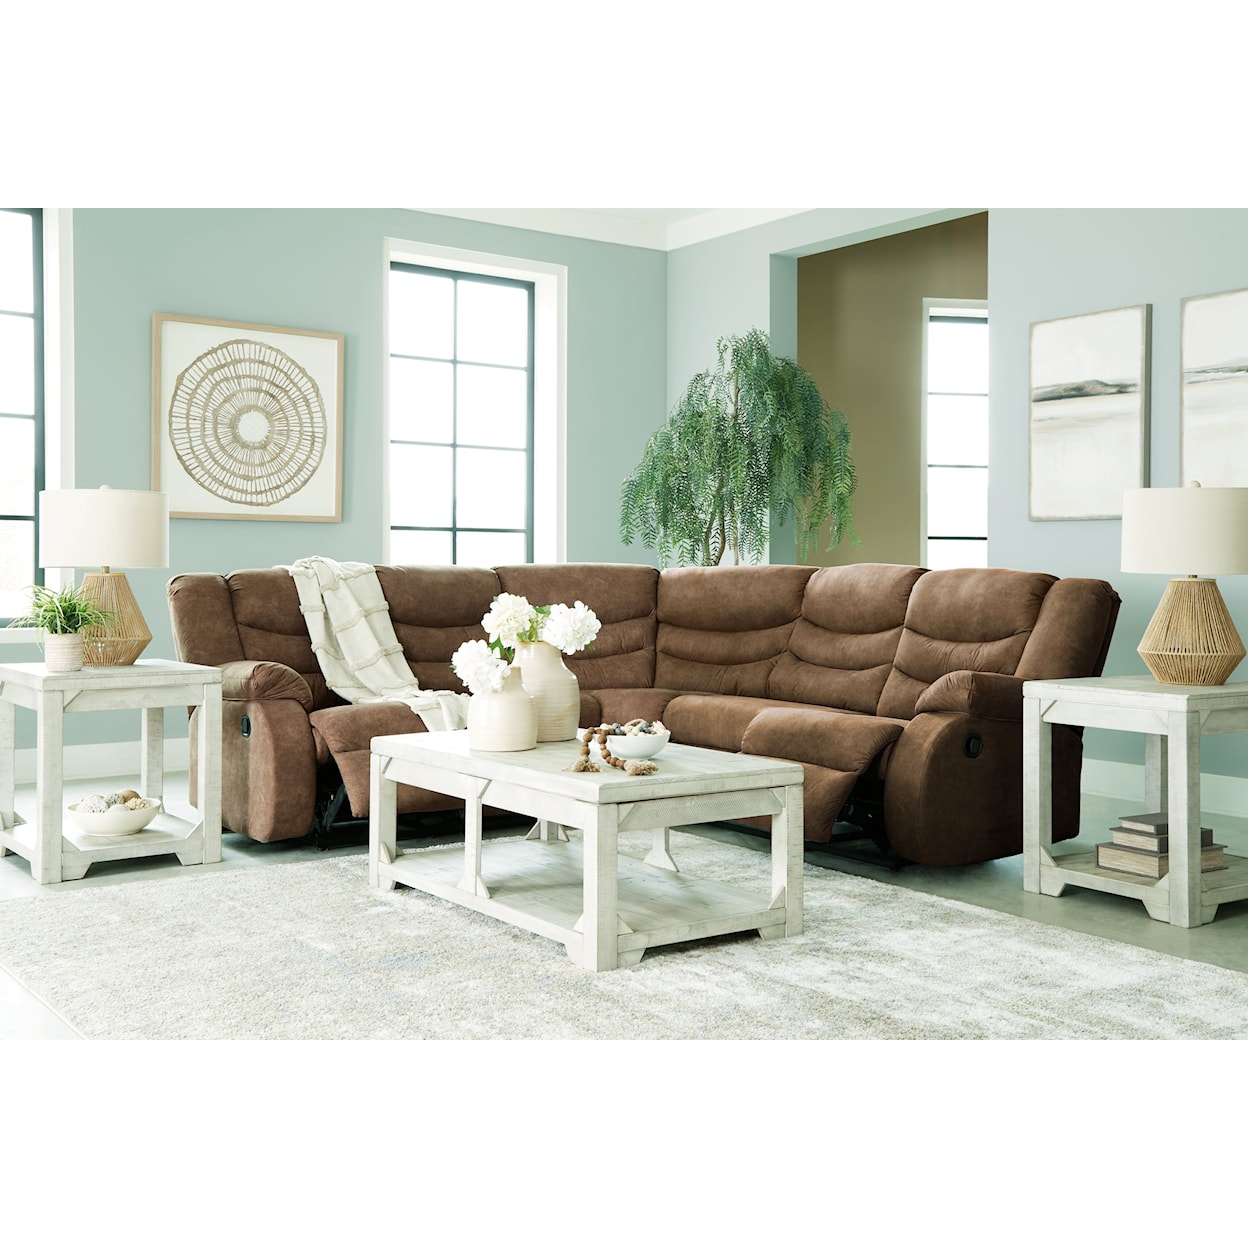 Ashley Furniture Signature Design Partymate Reclining Sectional